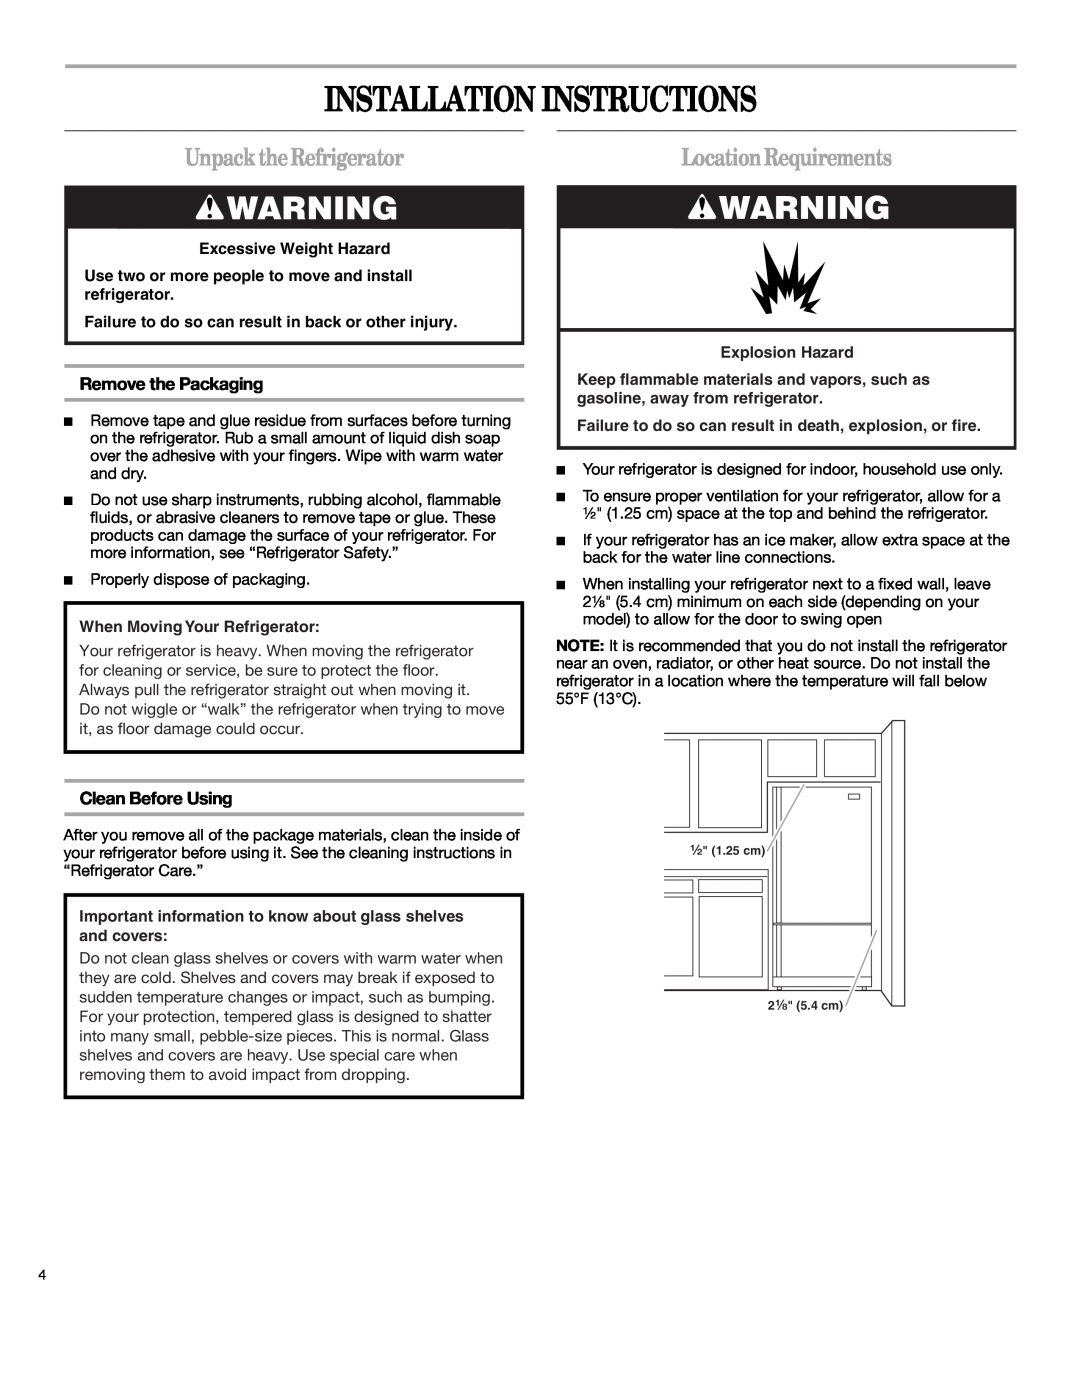 Whirlpool 12828125 manual Installation Instructions, Unpack the Refrigerator, Location Requirements, Remove the Packaging 